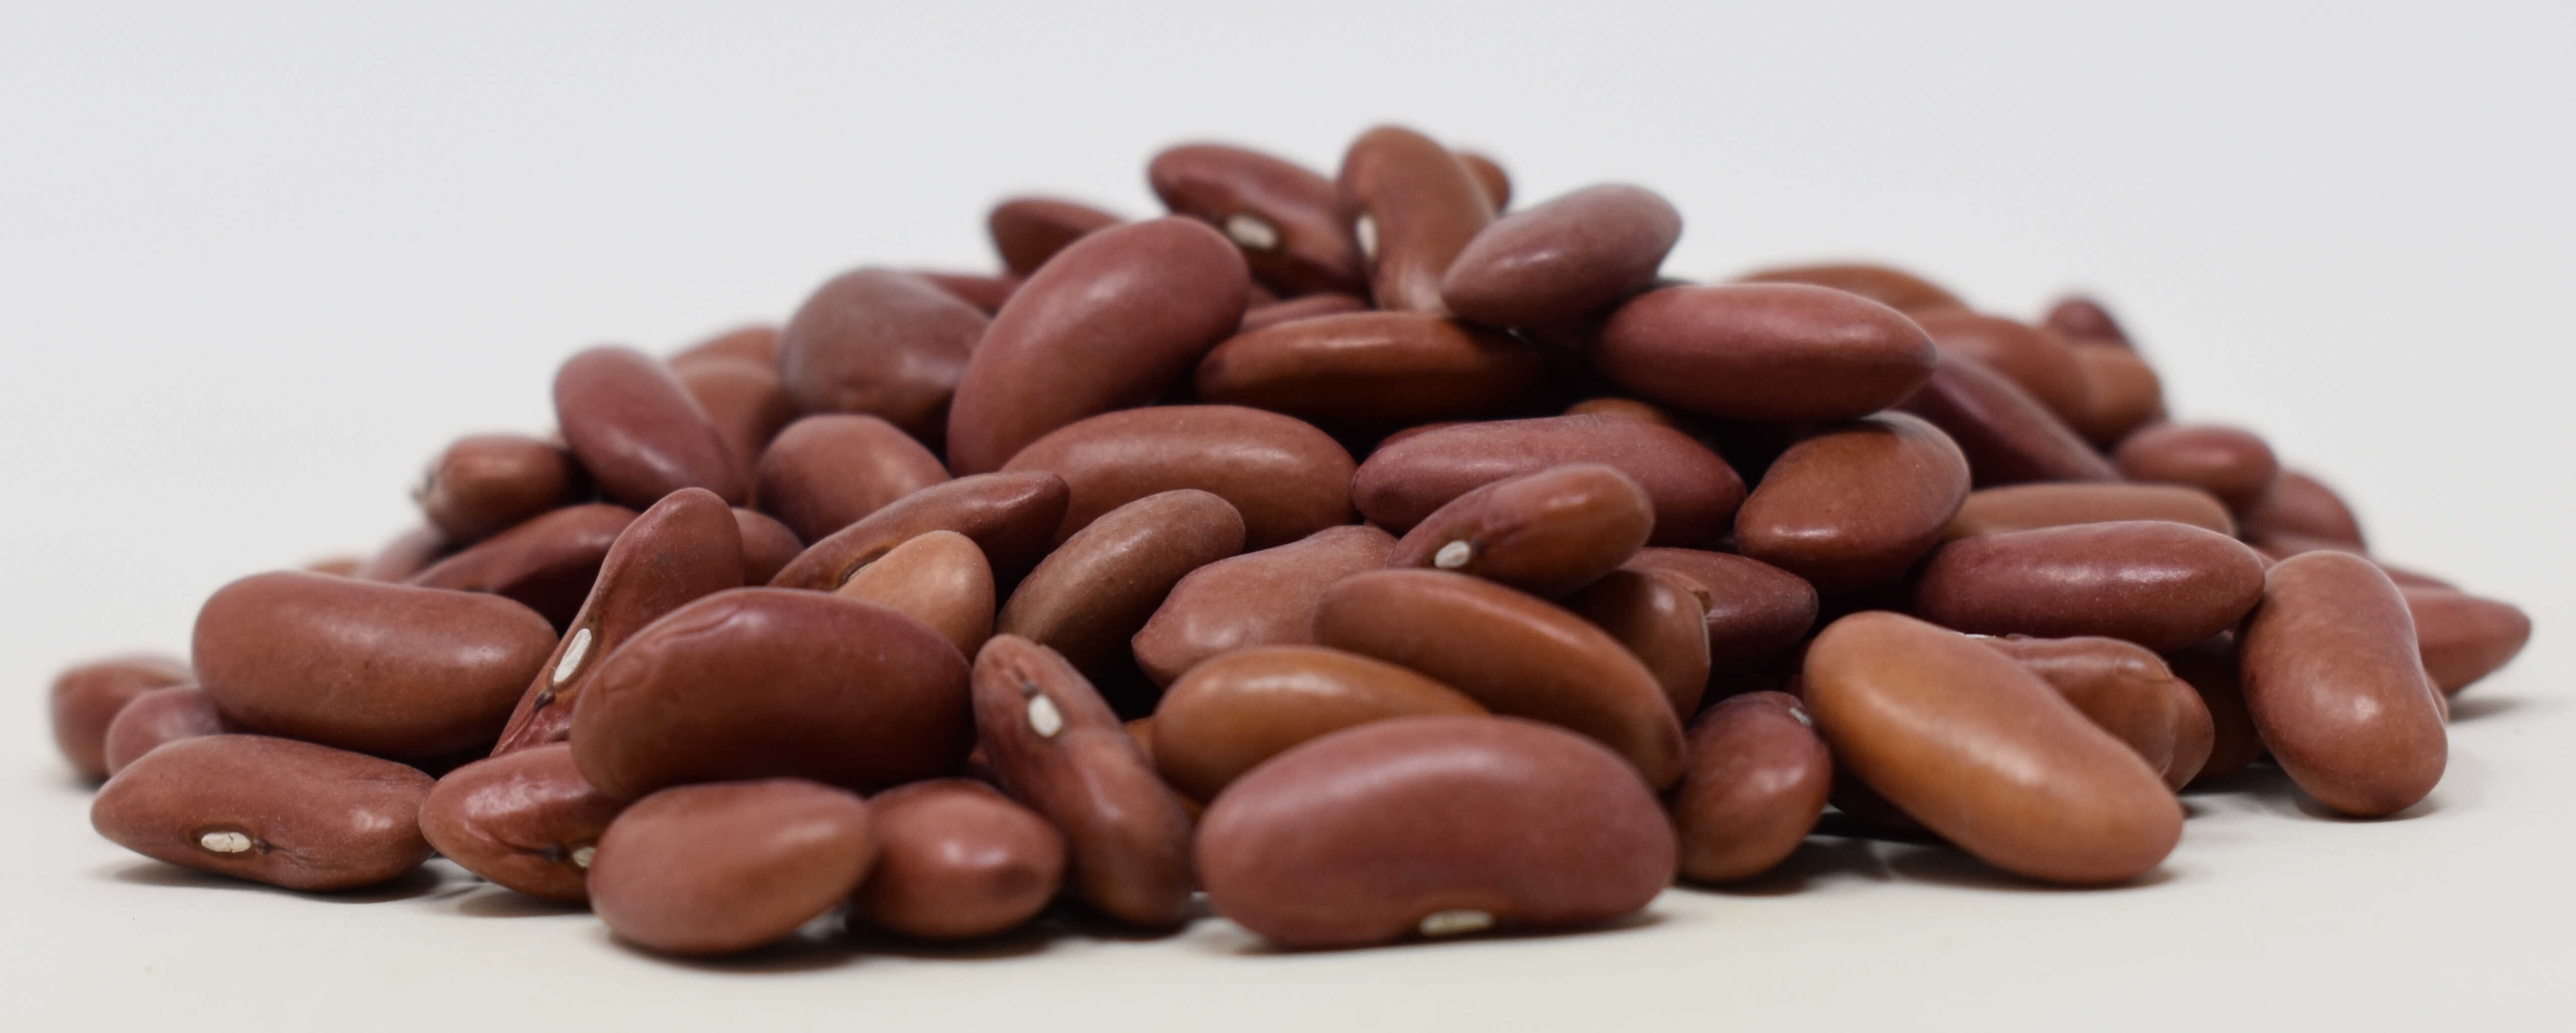 Red Kidney Beans - Side Photo